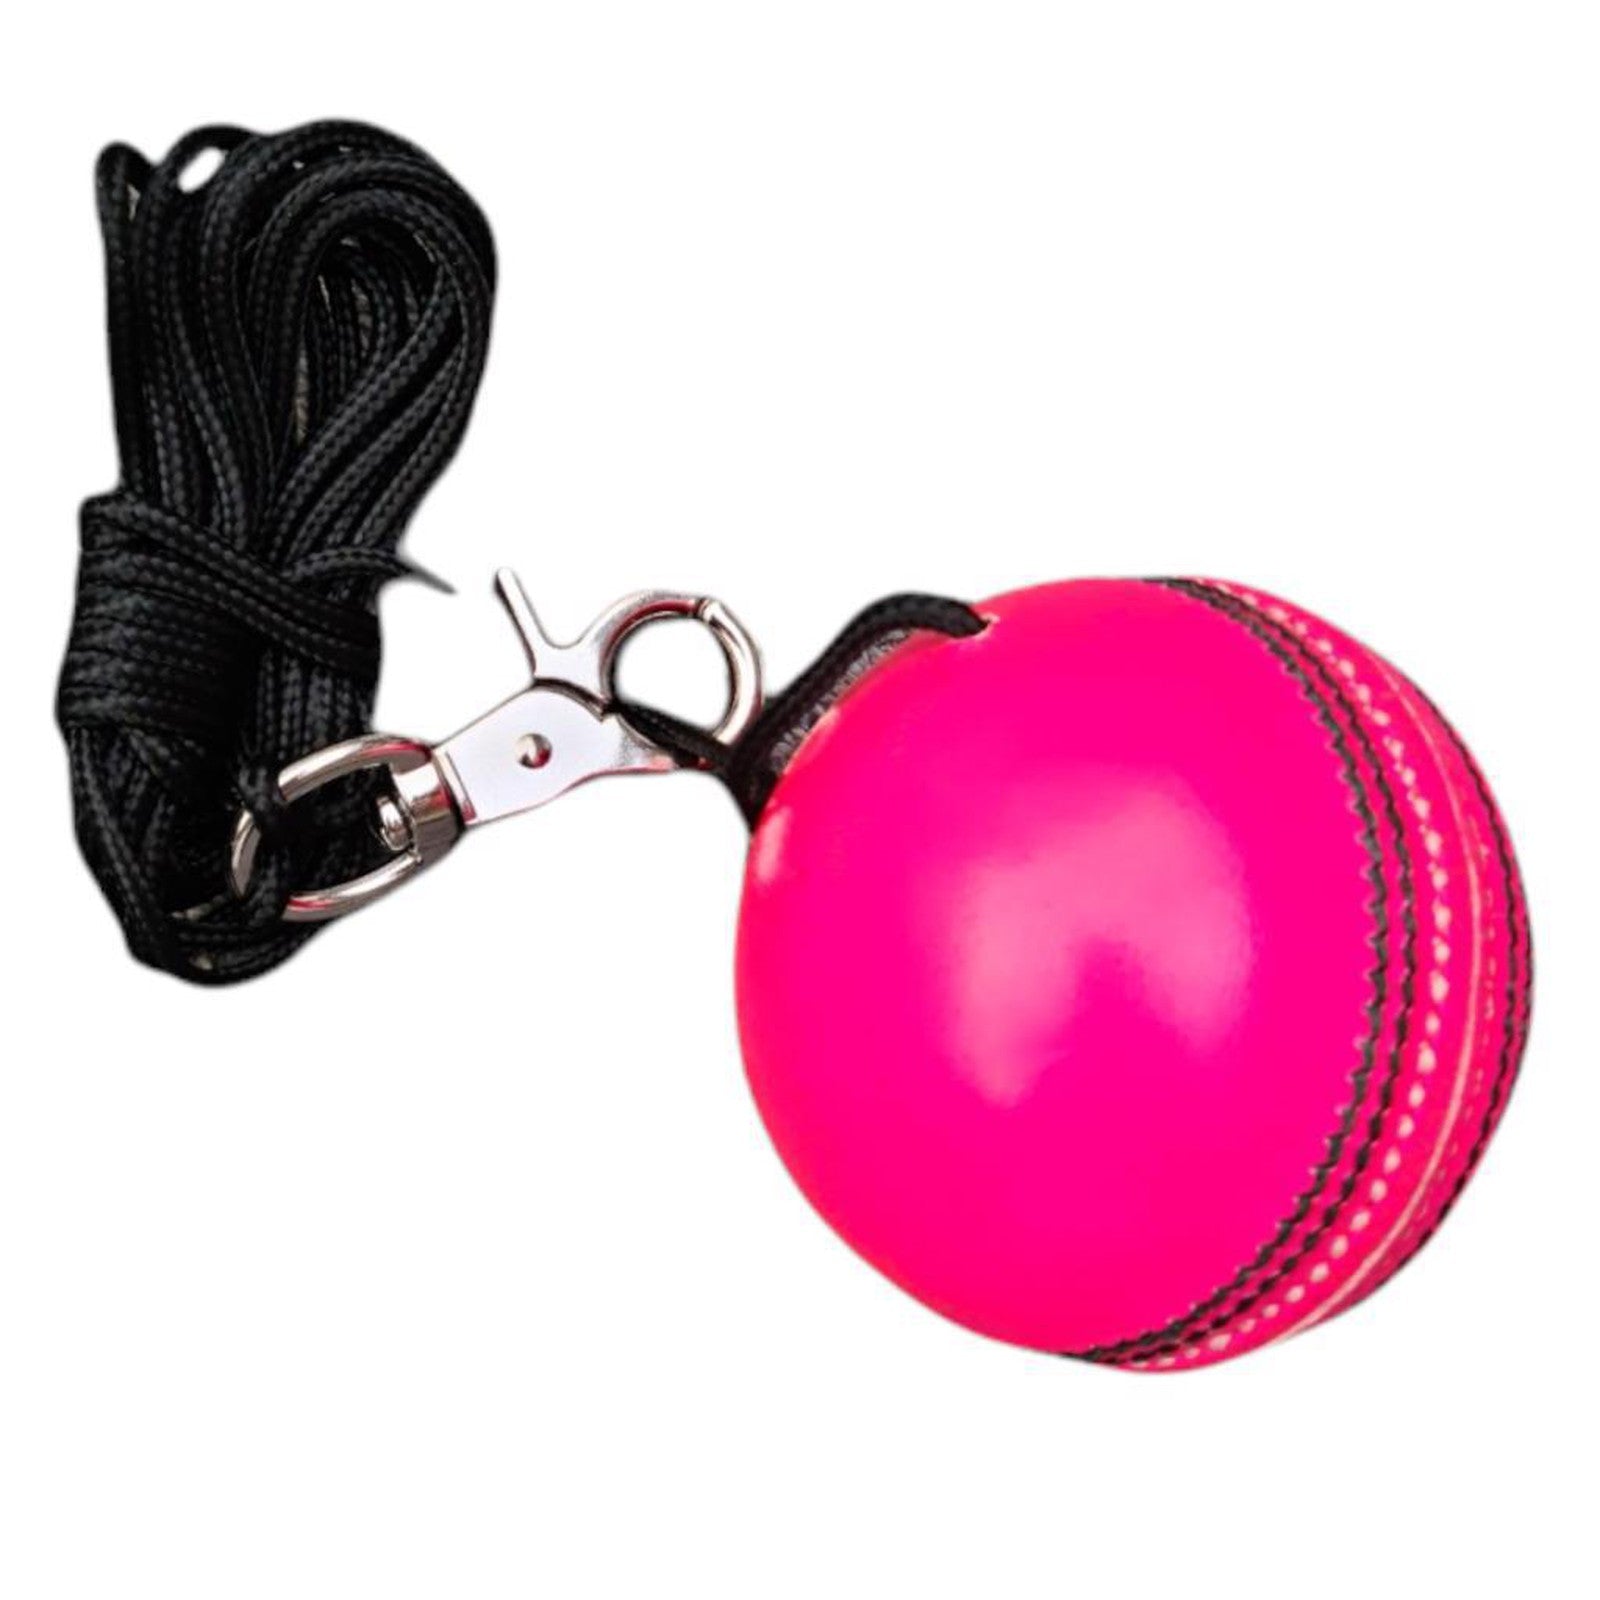 The V Net Replacement String Ball - 156gm Pink